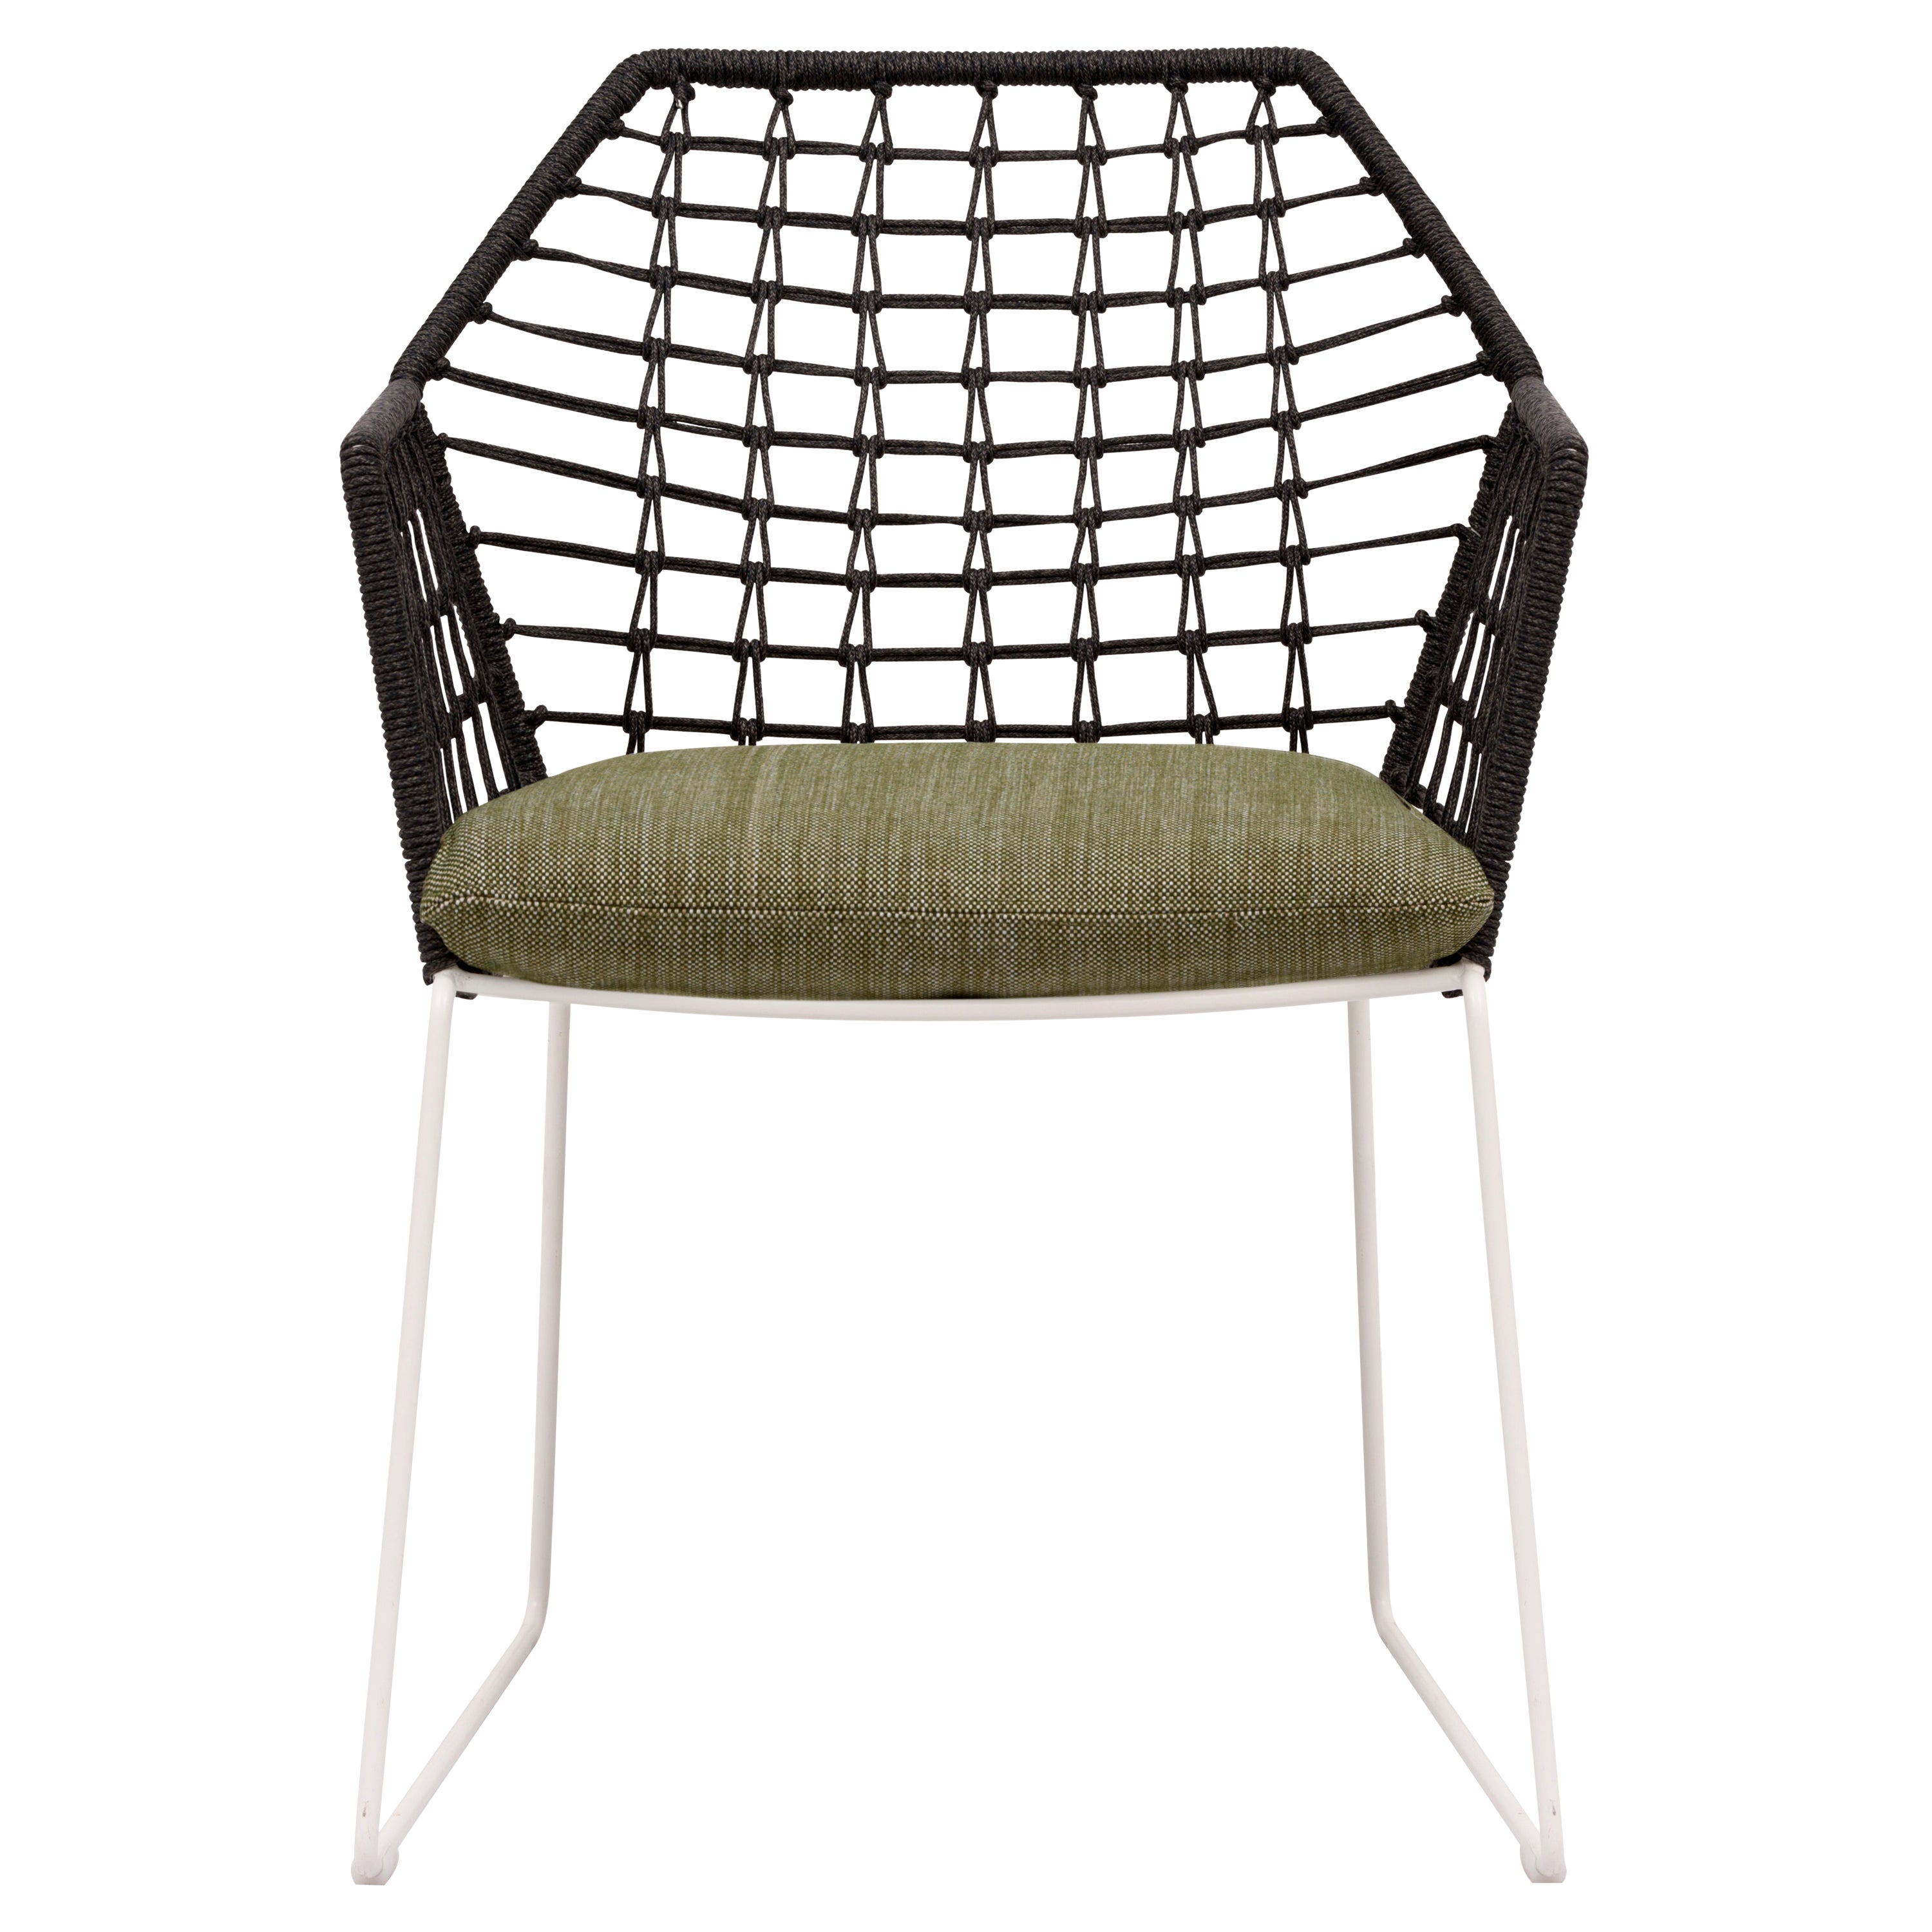 New York Soleil Armrest Chair in Black Rope Frame & White Legs by Sergio Bicego